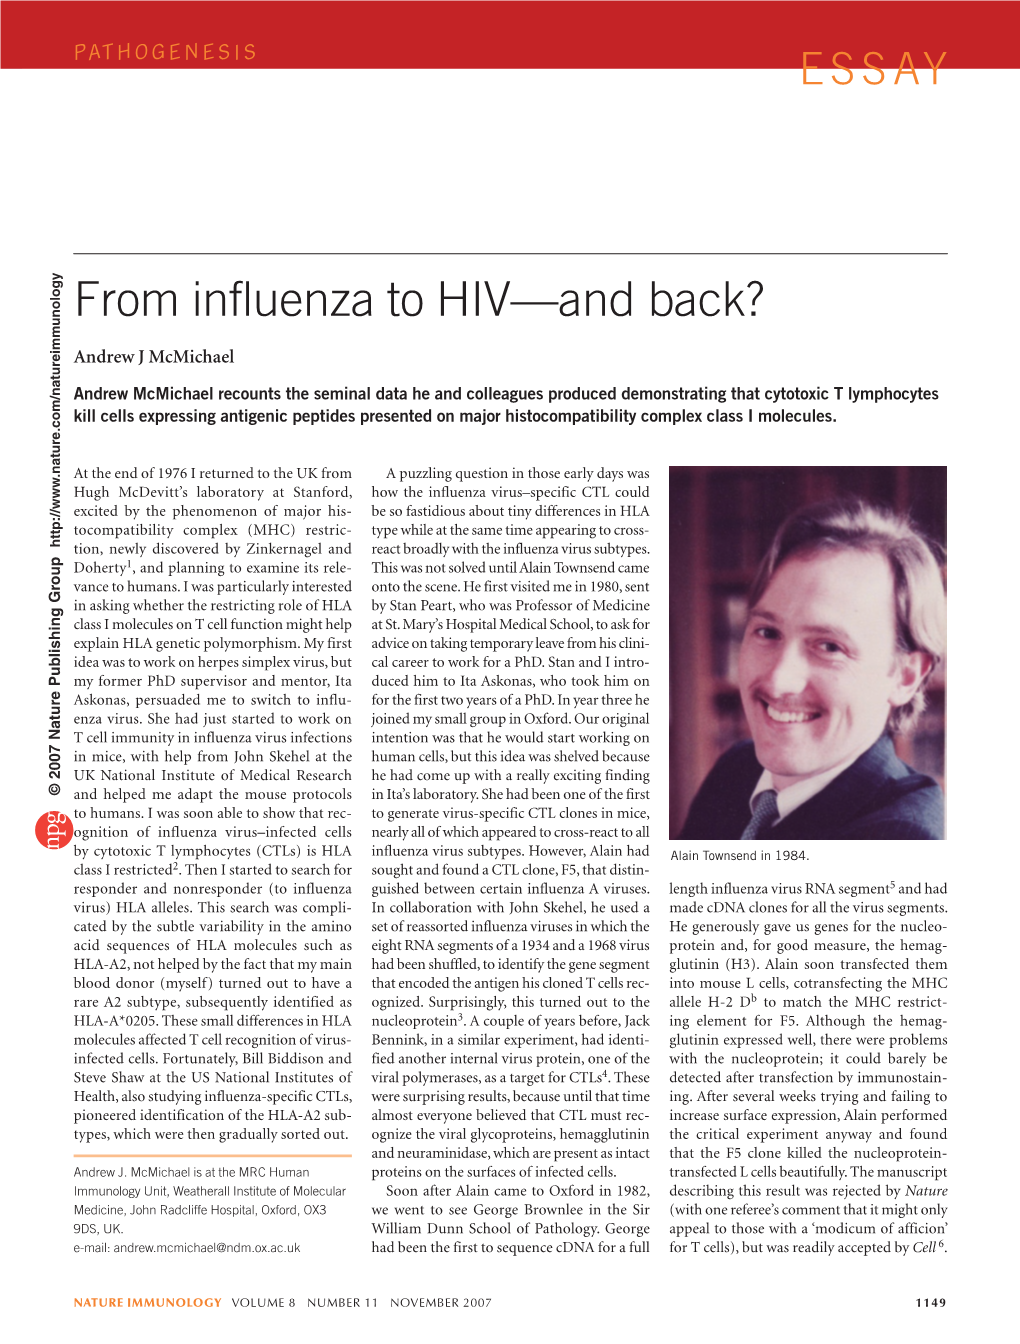 From Influenza to HIV—And Back?